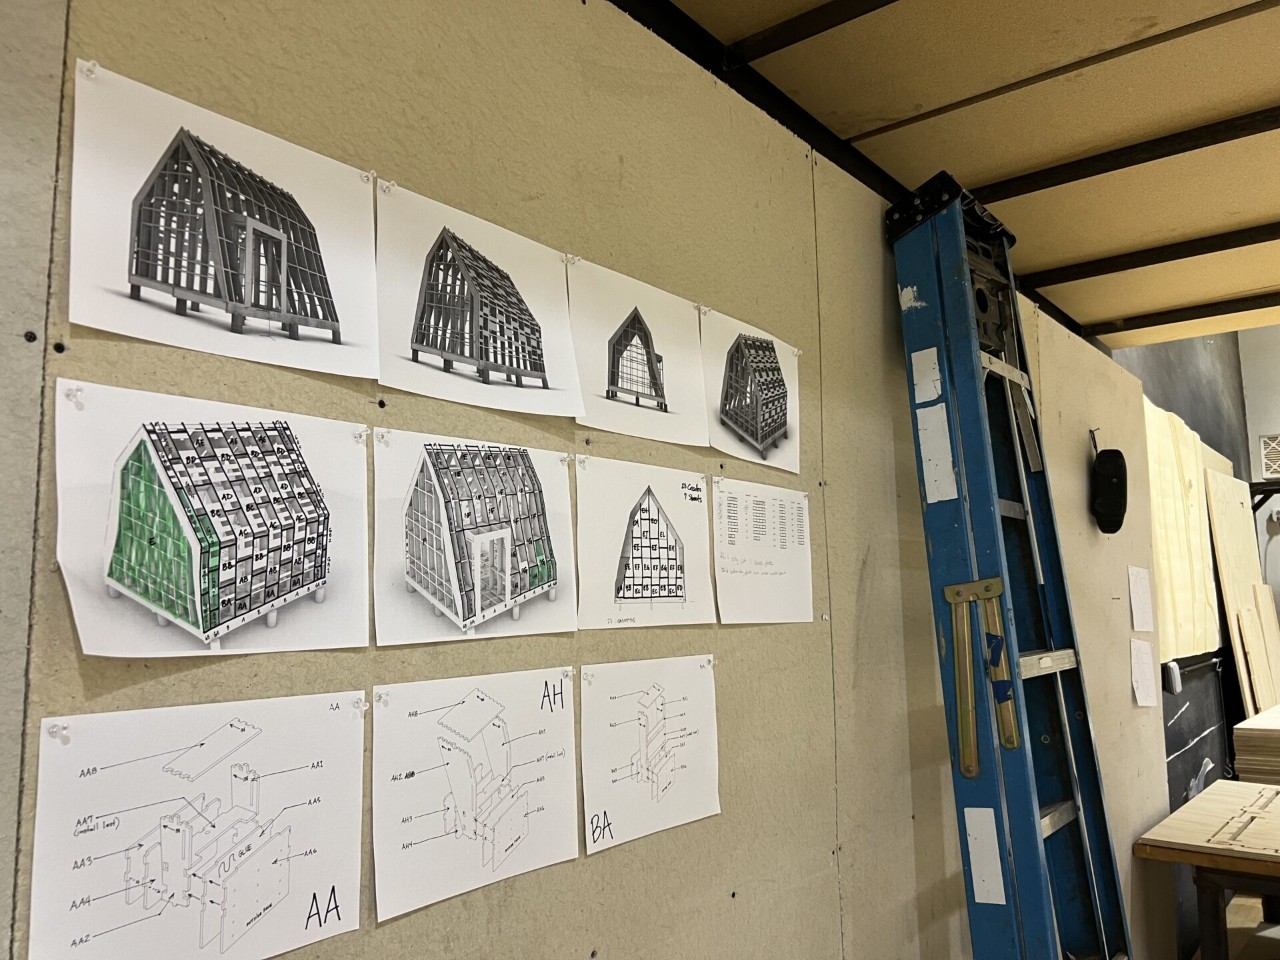 concepts and sketches are hung on the wall in the workshop